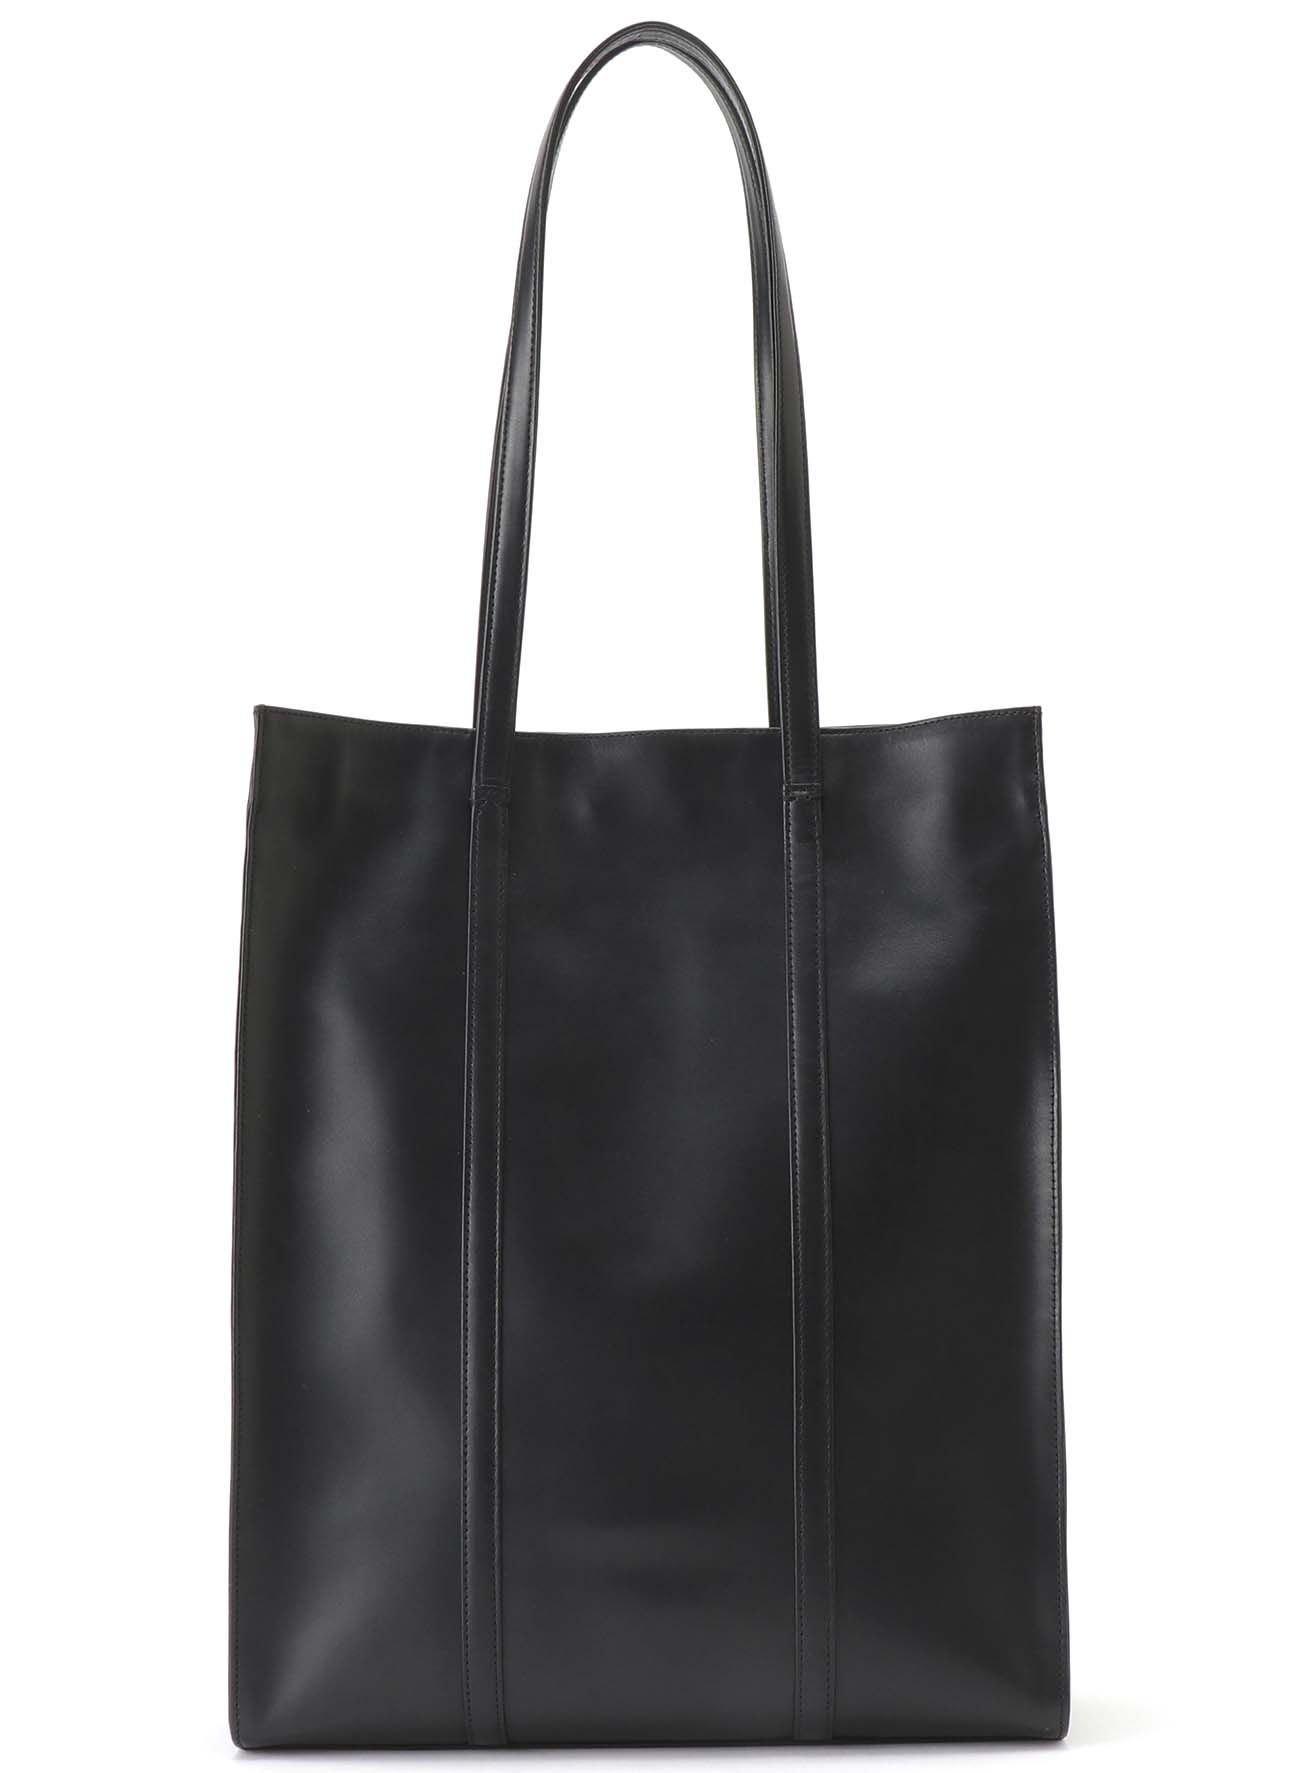 SMOOTH LEATHER NARROW BELT TOTE